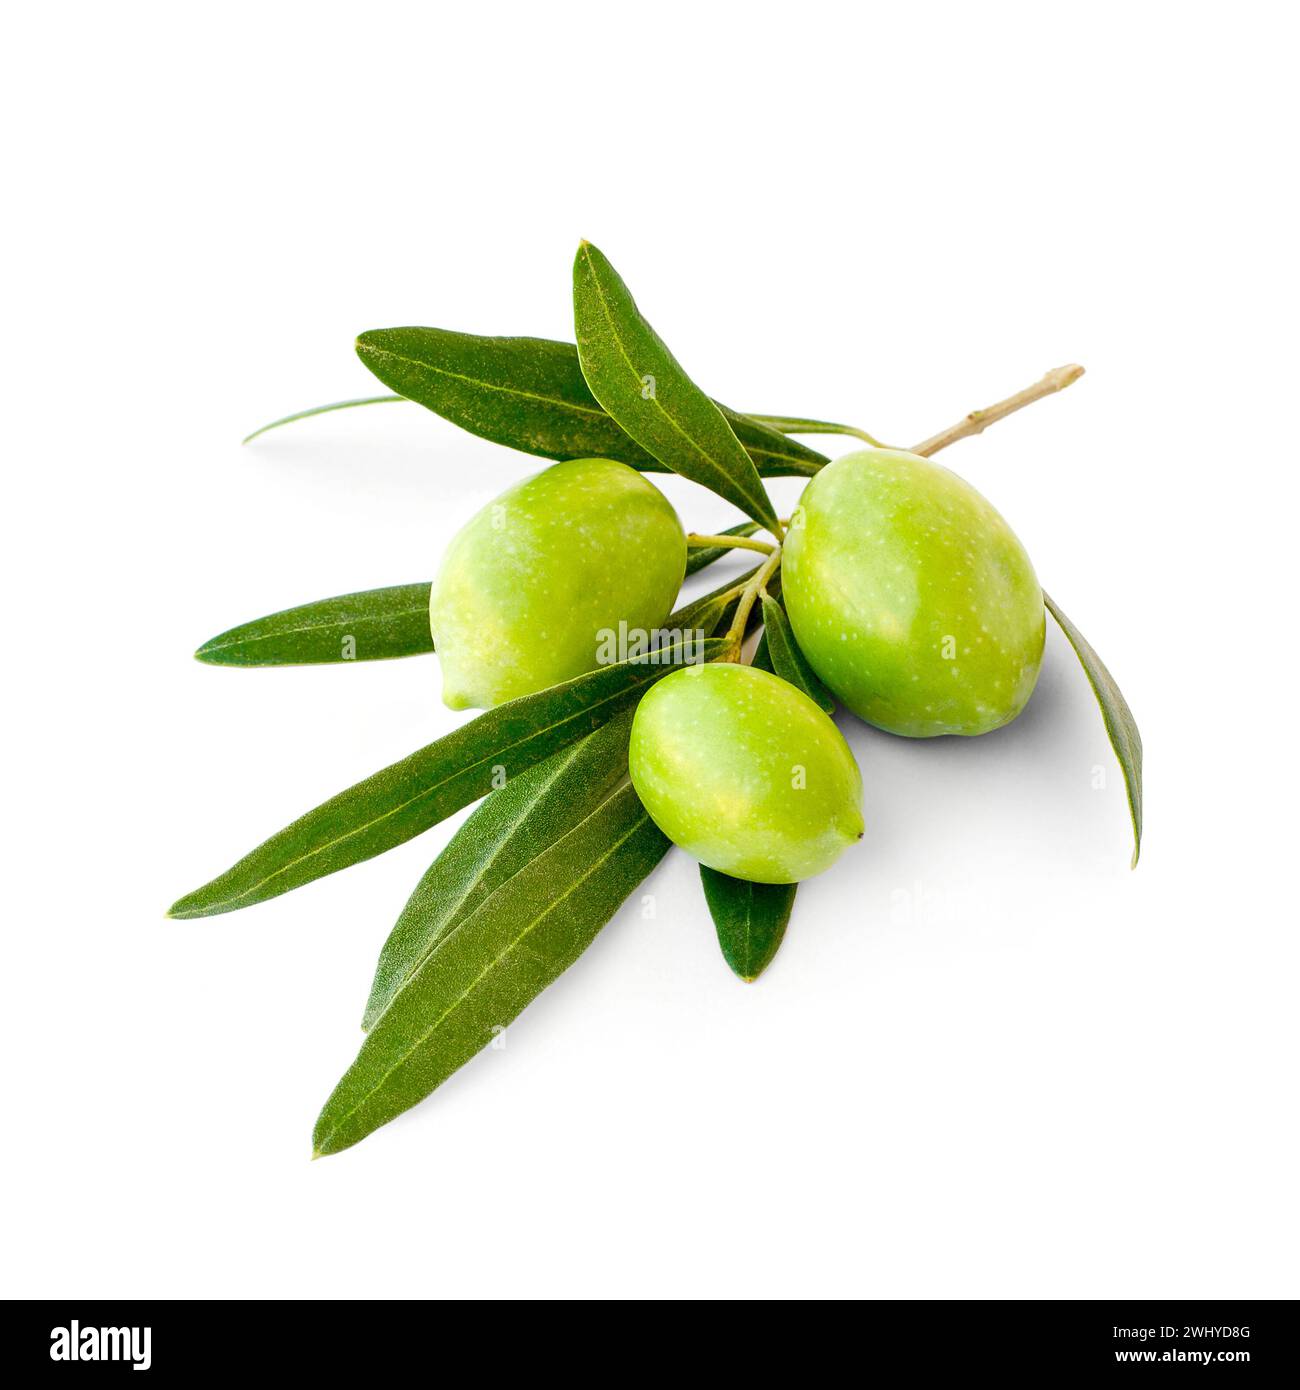 Three green ripe olives on branch Stock Photo